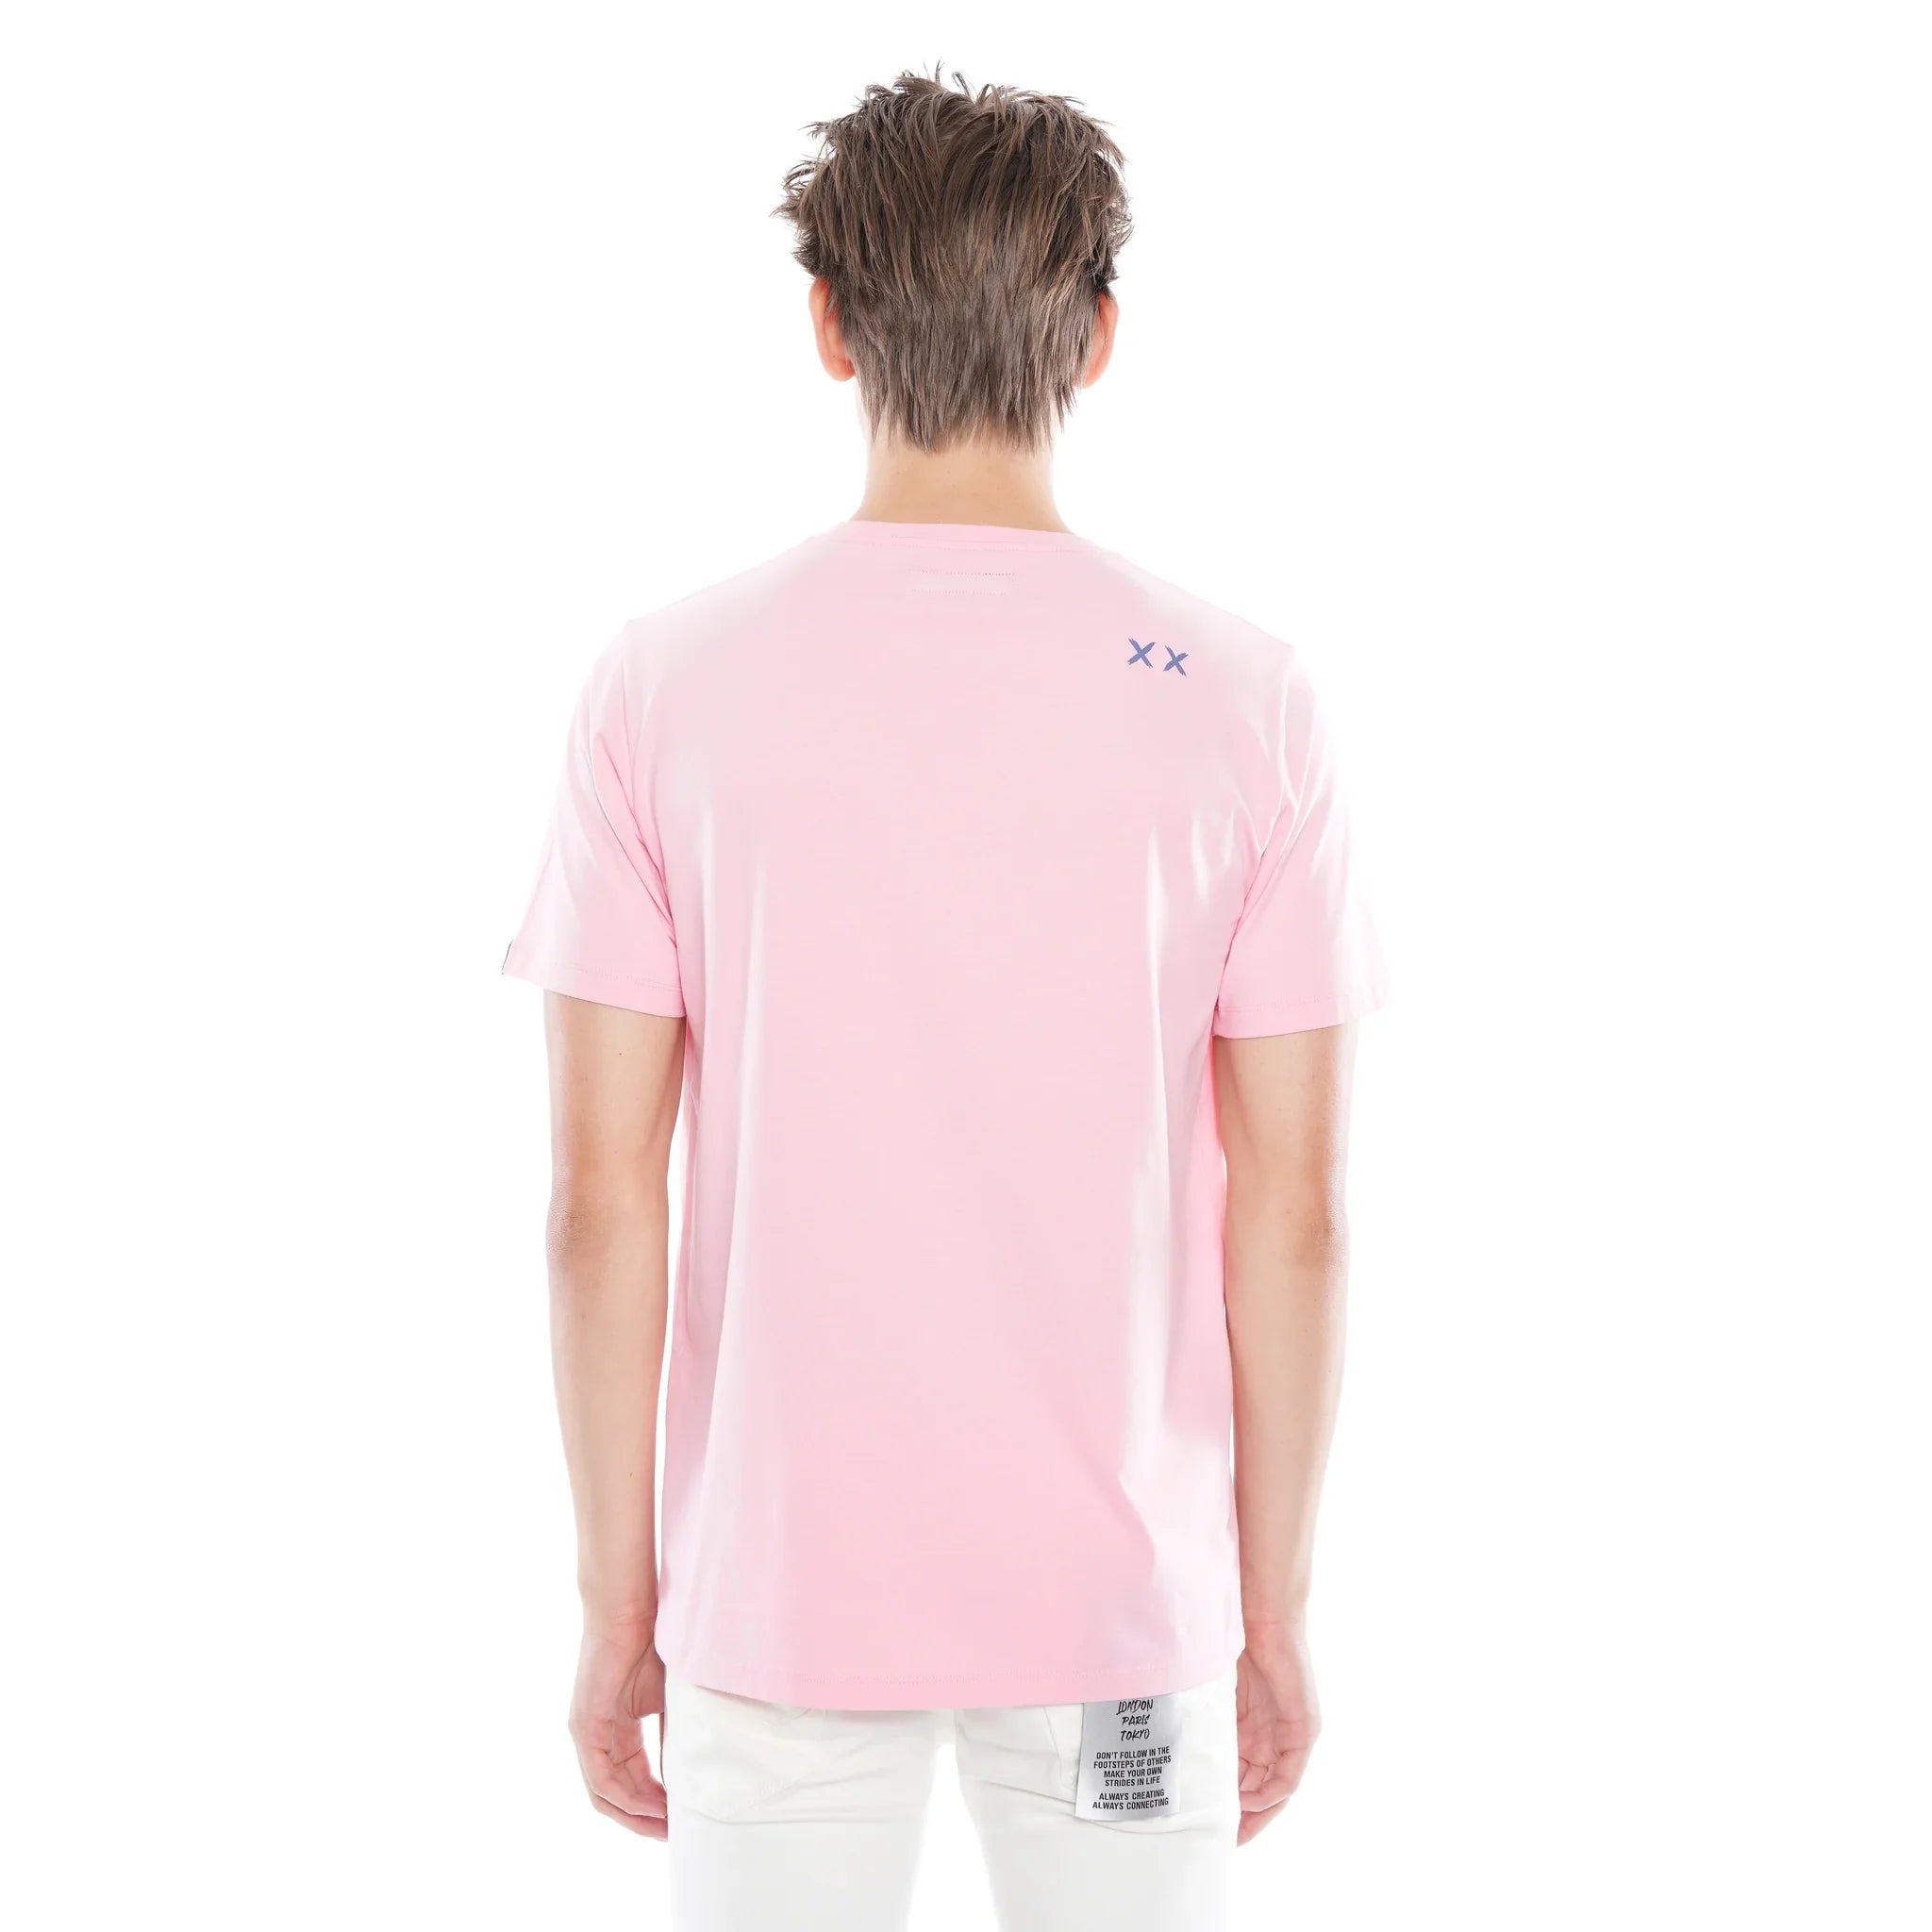 CULT OF INDIVIDUALITY SS PASTEL LOGO TEE - Gravity NYC